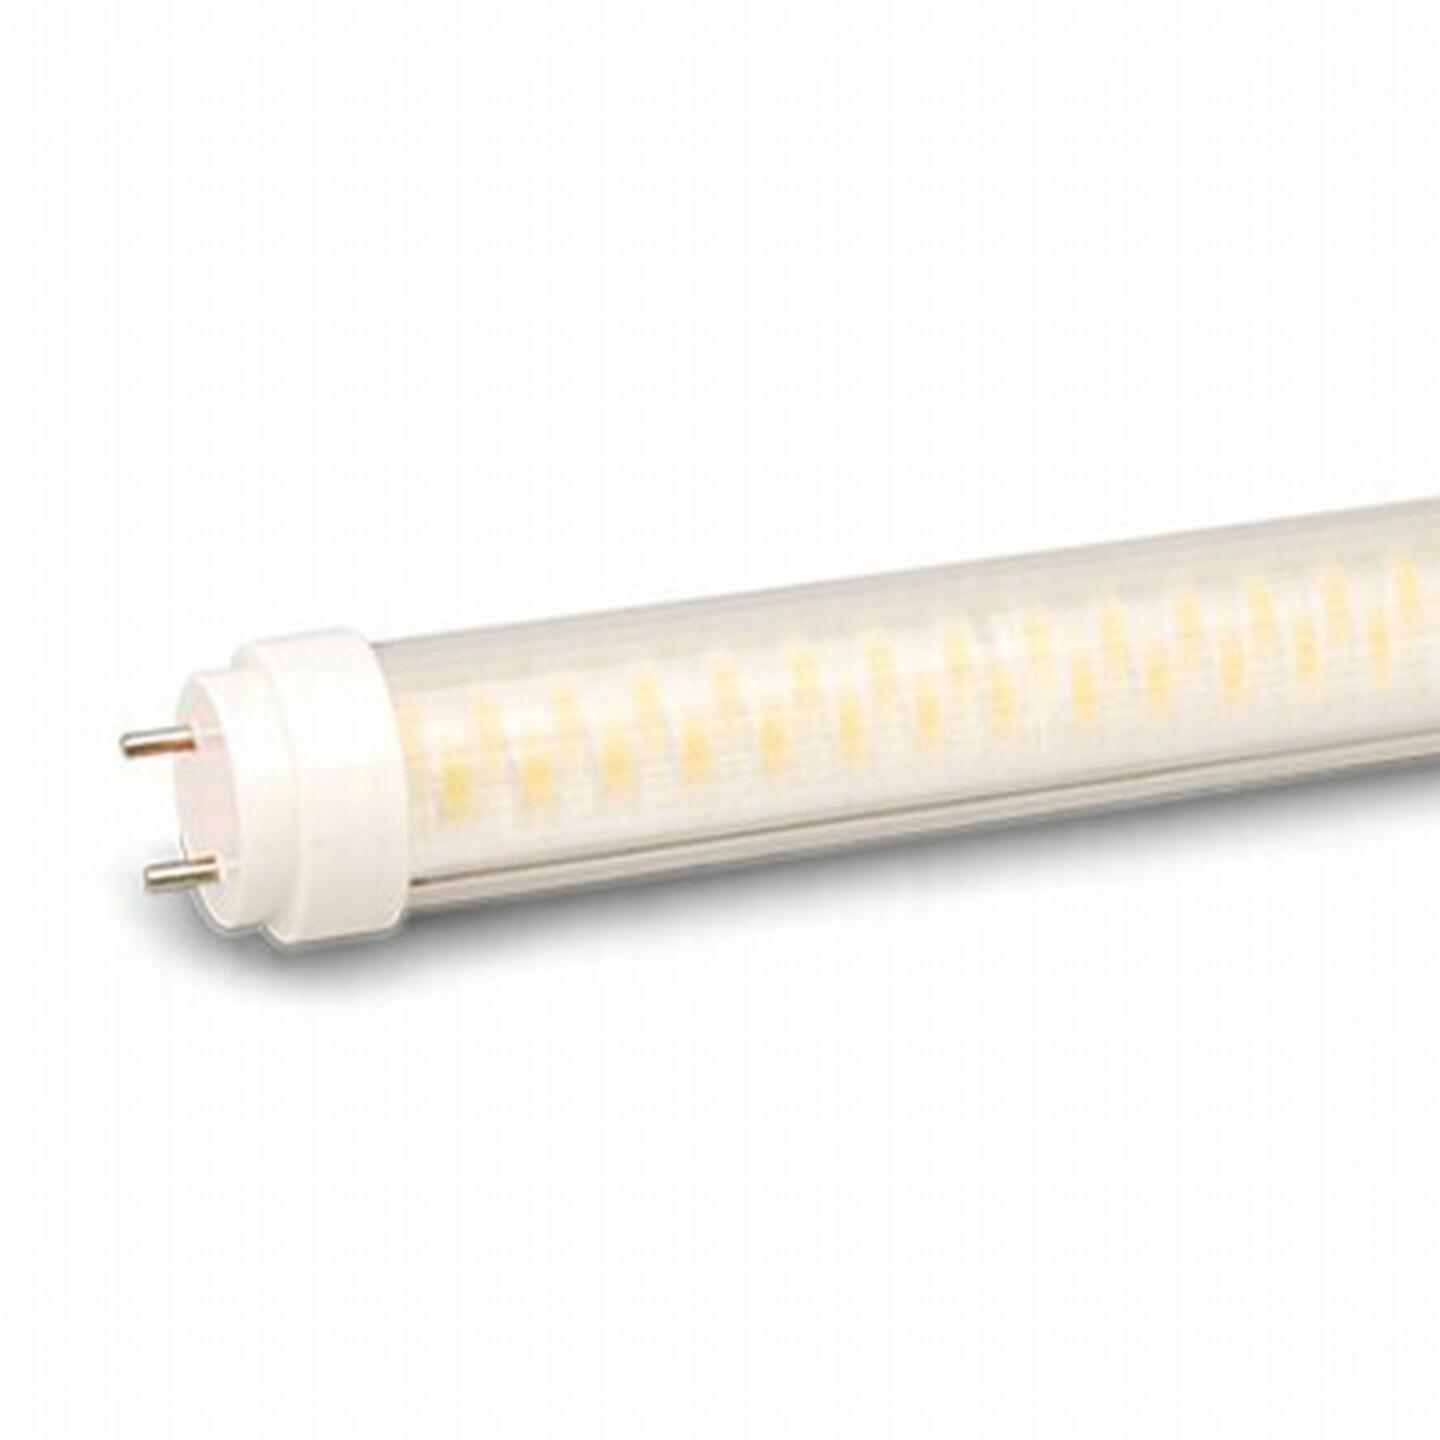 Viribright LED T8 Fluoro Replacement Tube 10W 600mm Natural white